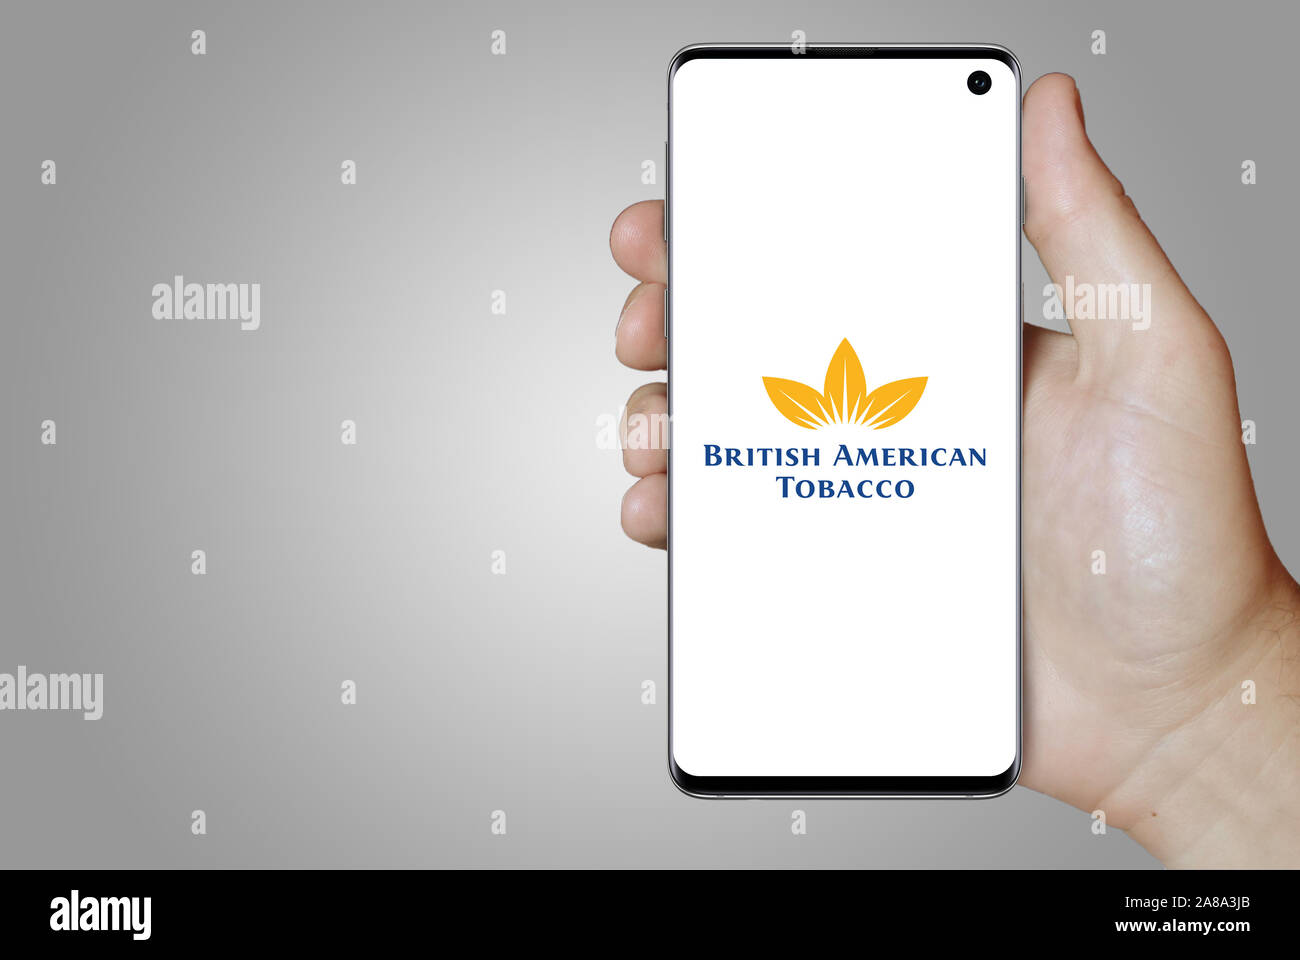 Logo of public company British American Tobacco displayed on a smartphone. Grey background. Credit: PIXDUCE Stock Photo